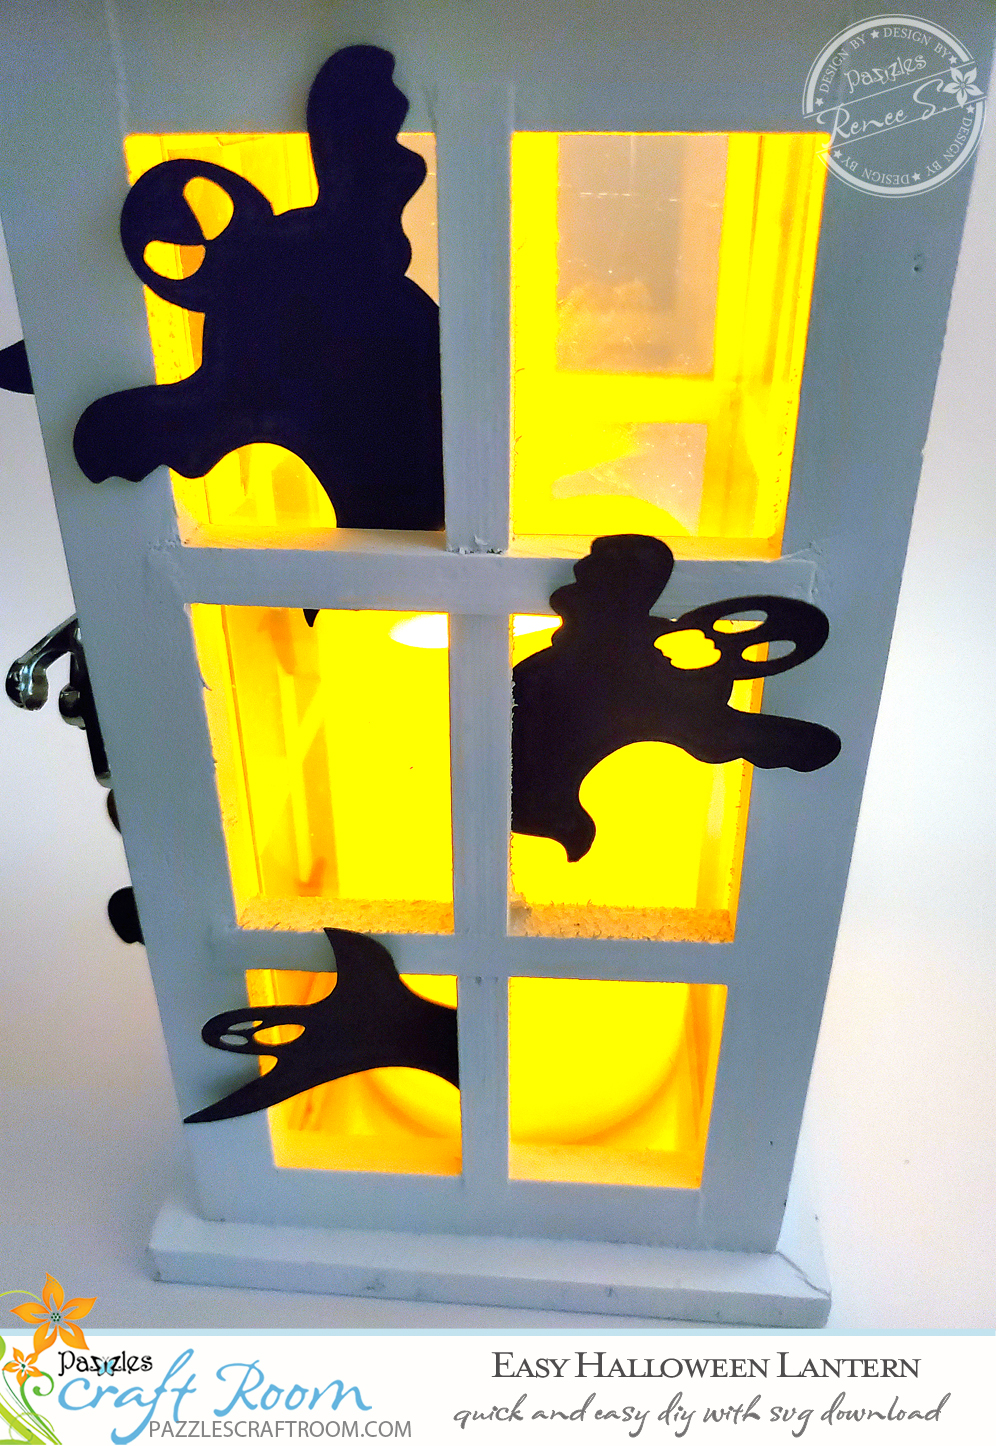 Pazzles DIY Halloween Lantern with instant SVG download. Compatible with all major electronic cutters including Pazzles Inspiration, Cricut, and Silhouette Cameo. Design by Renee Smart.